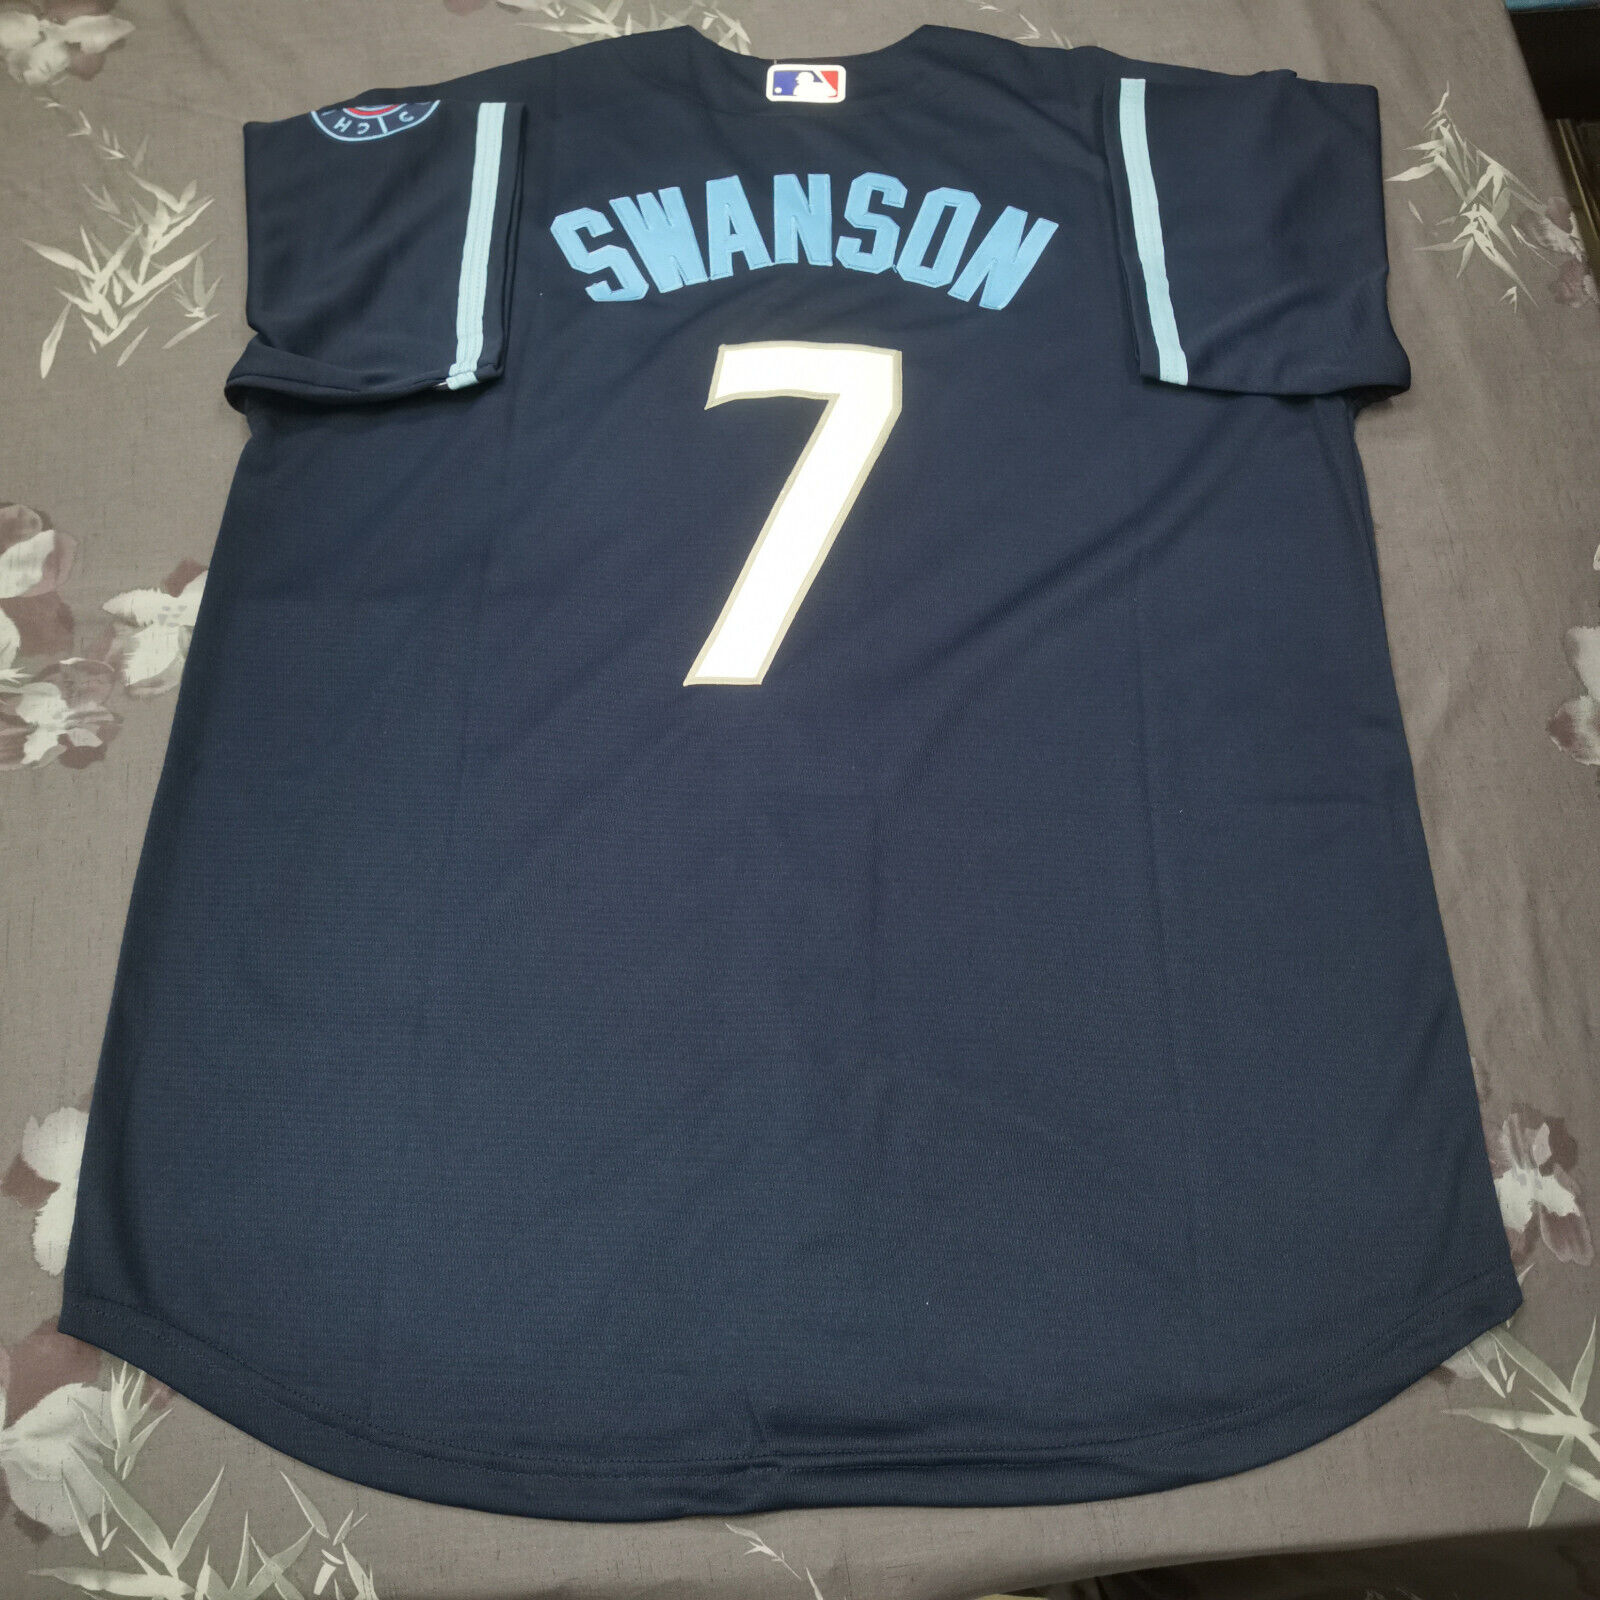 Dansby Swanson Jersey Nike Chicago Cubs City Connect Jersey Chicago Cubs  Shirt Cubs Game Today Baseball Jersey Shirts Chicago Cubs Jersey Mlb -  Laughinks